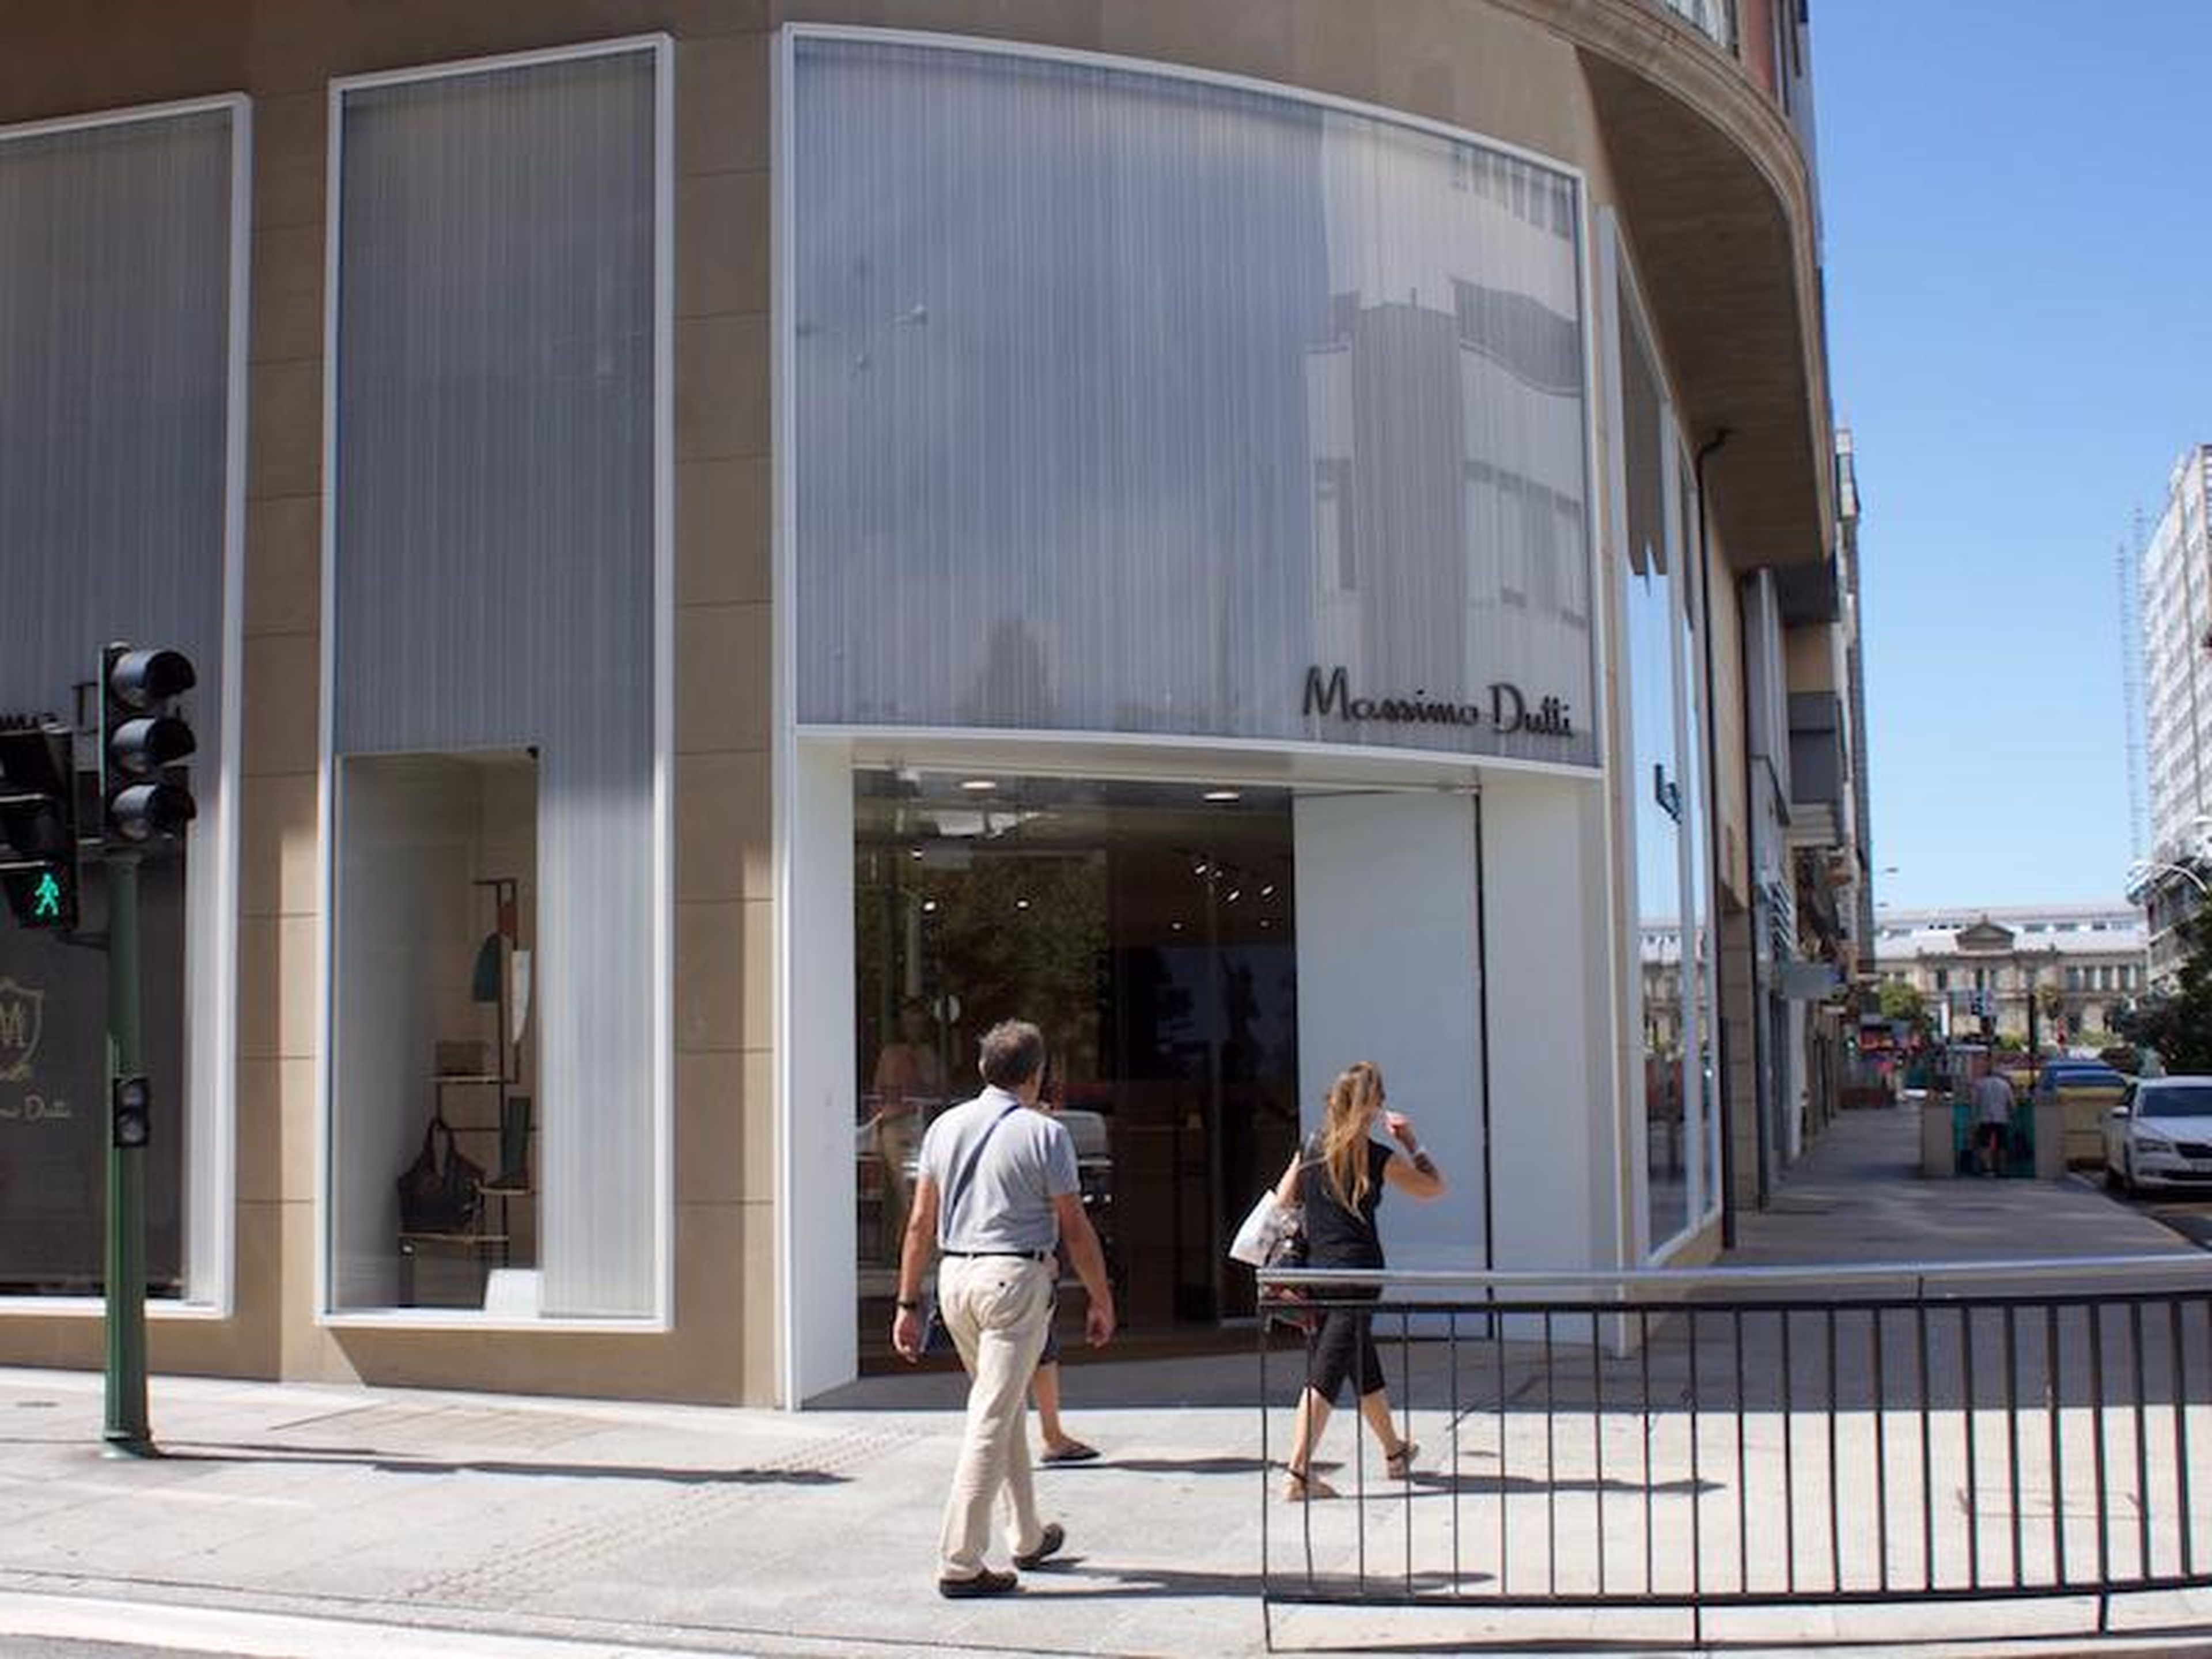 It doesn't take long to stumble across an Inditex-owned store in La Coruña.